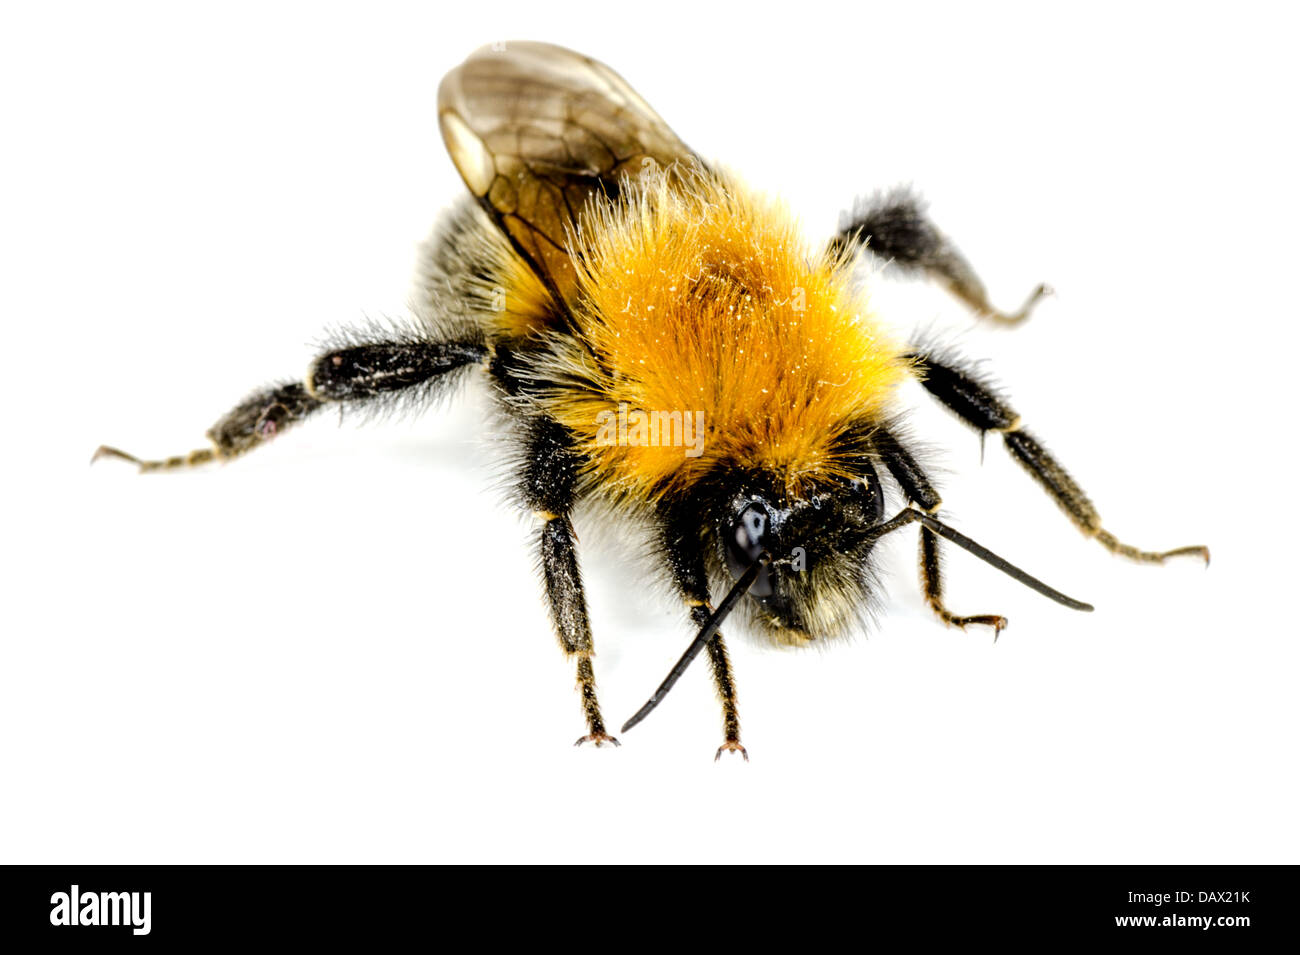 A closeup of a Bumblebee on a white background Stock Photo